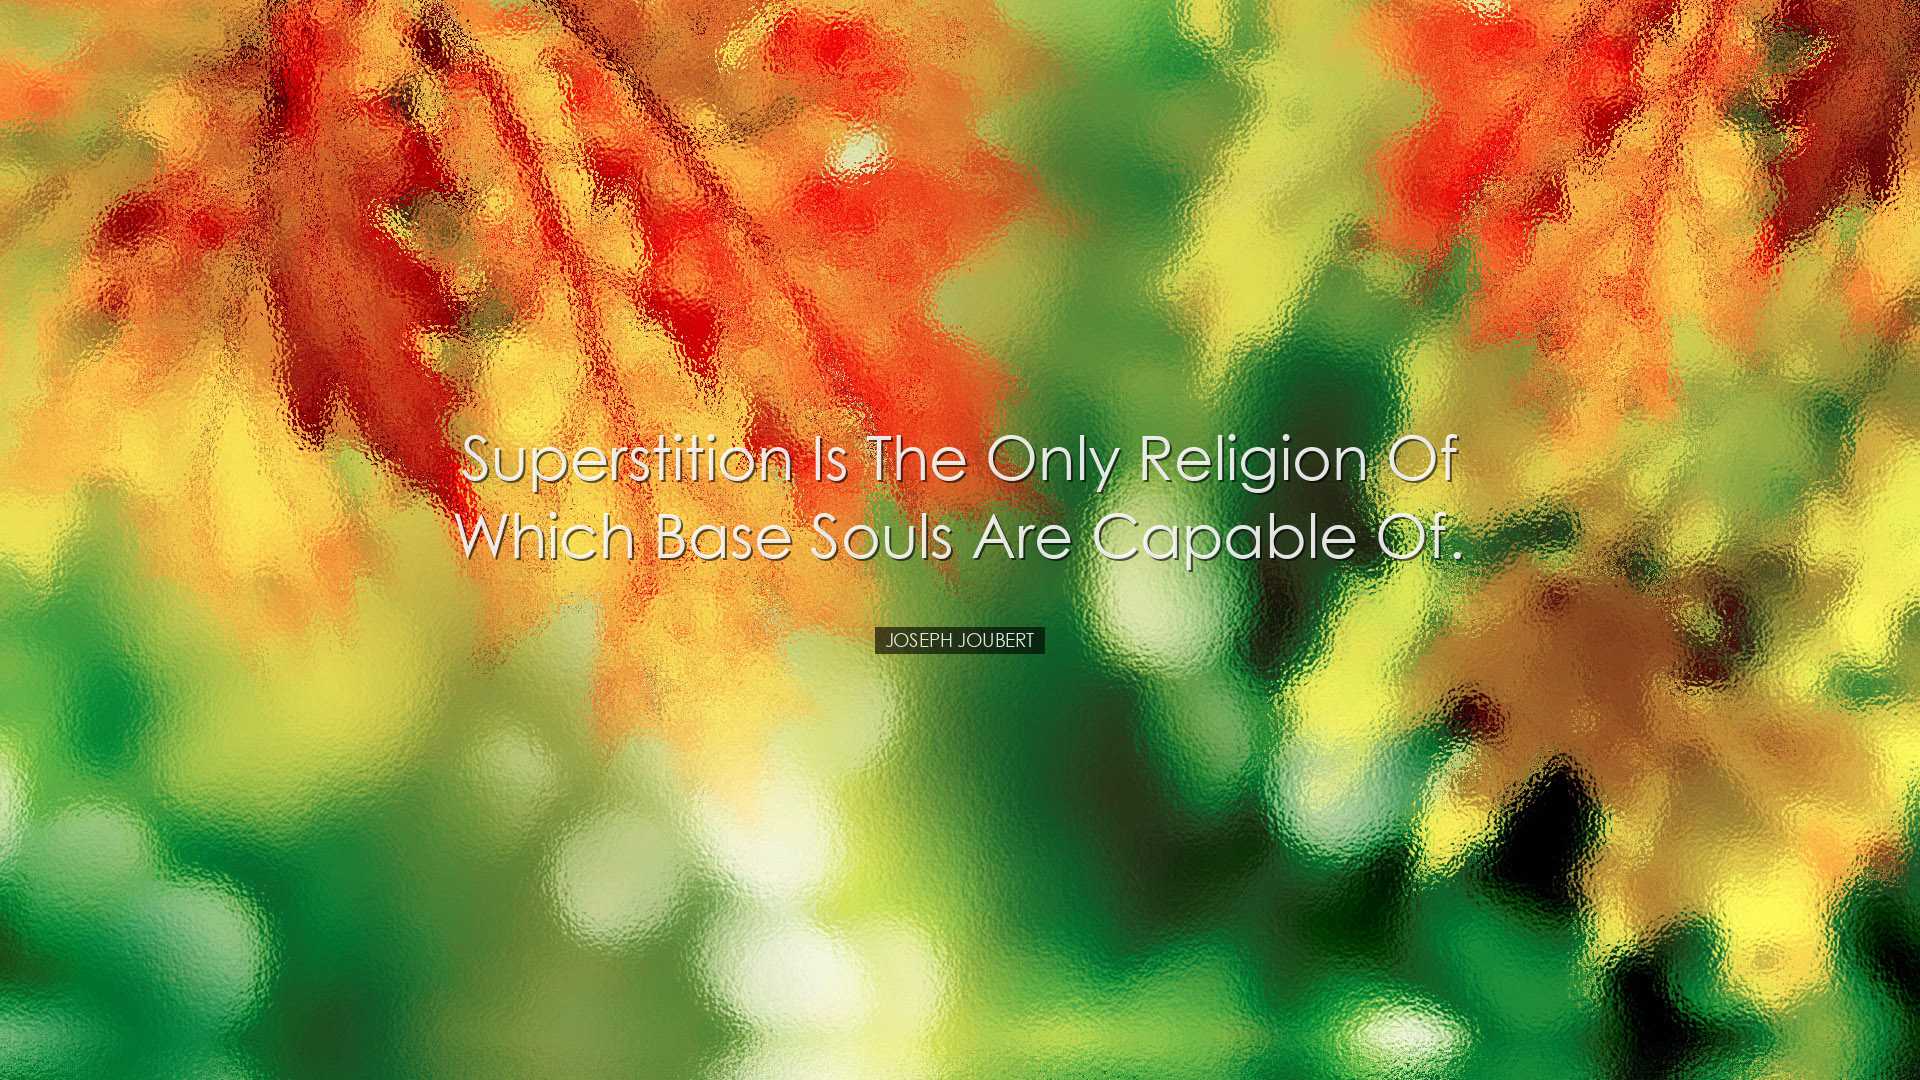 Superstition is the only religion of which base souls are capable